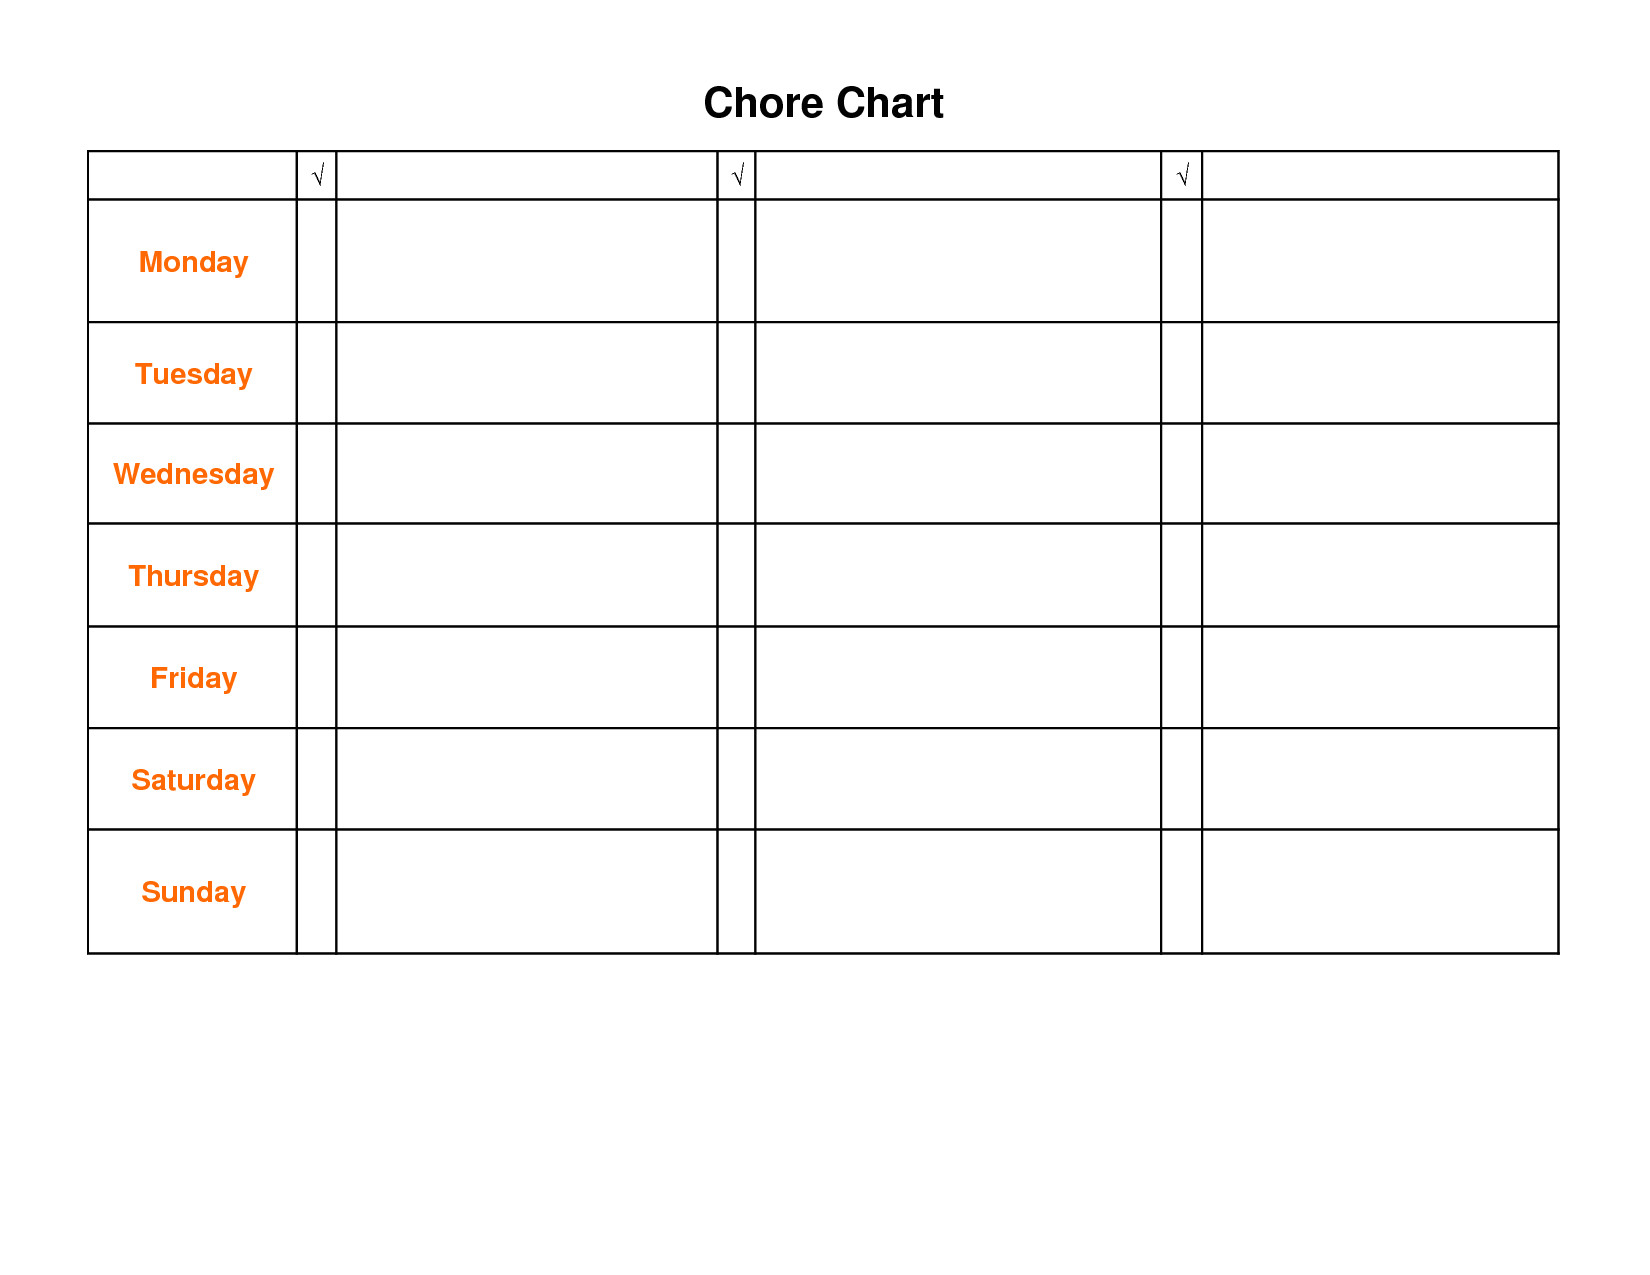 blank tally chart template tally chart template 8 free word pdf awesome collection of free charts templates